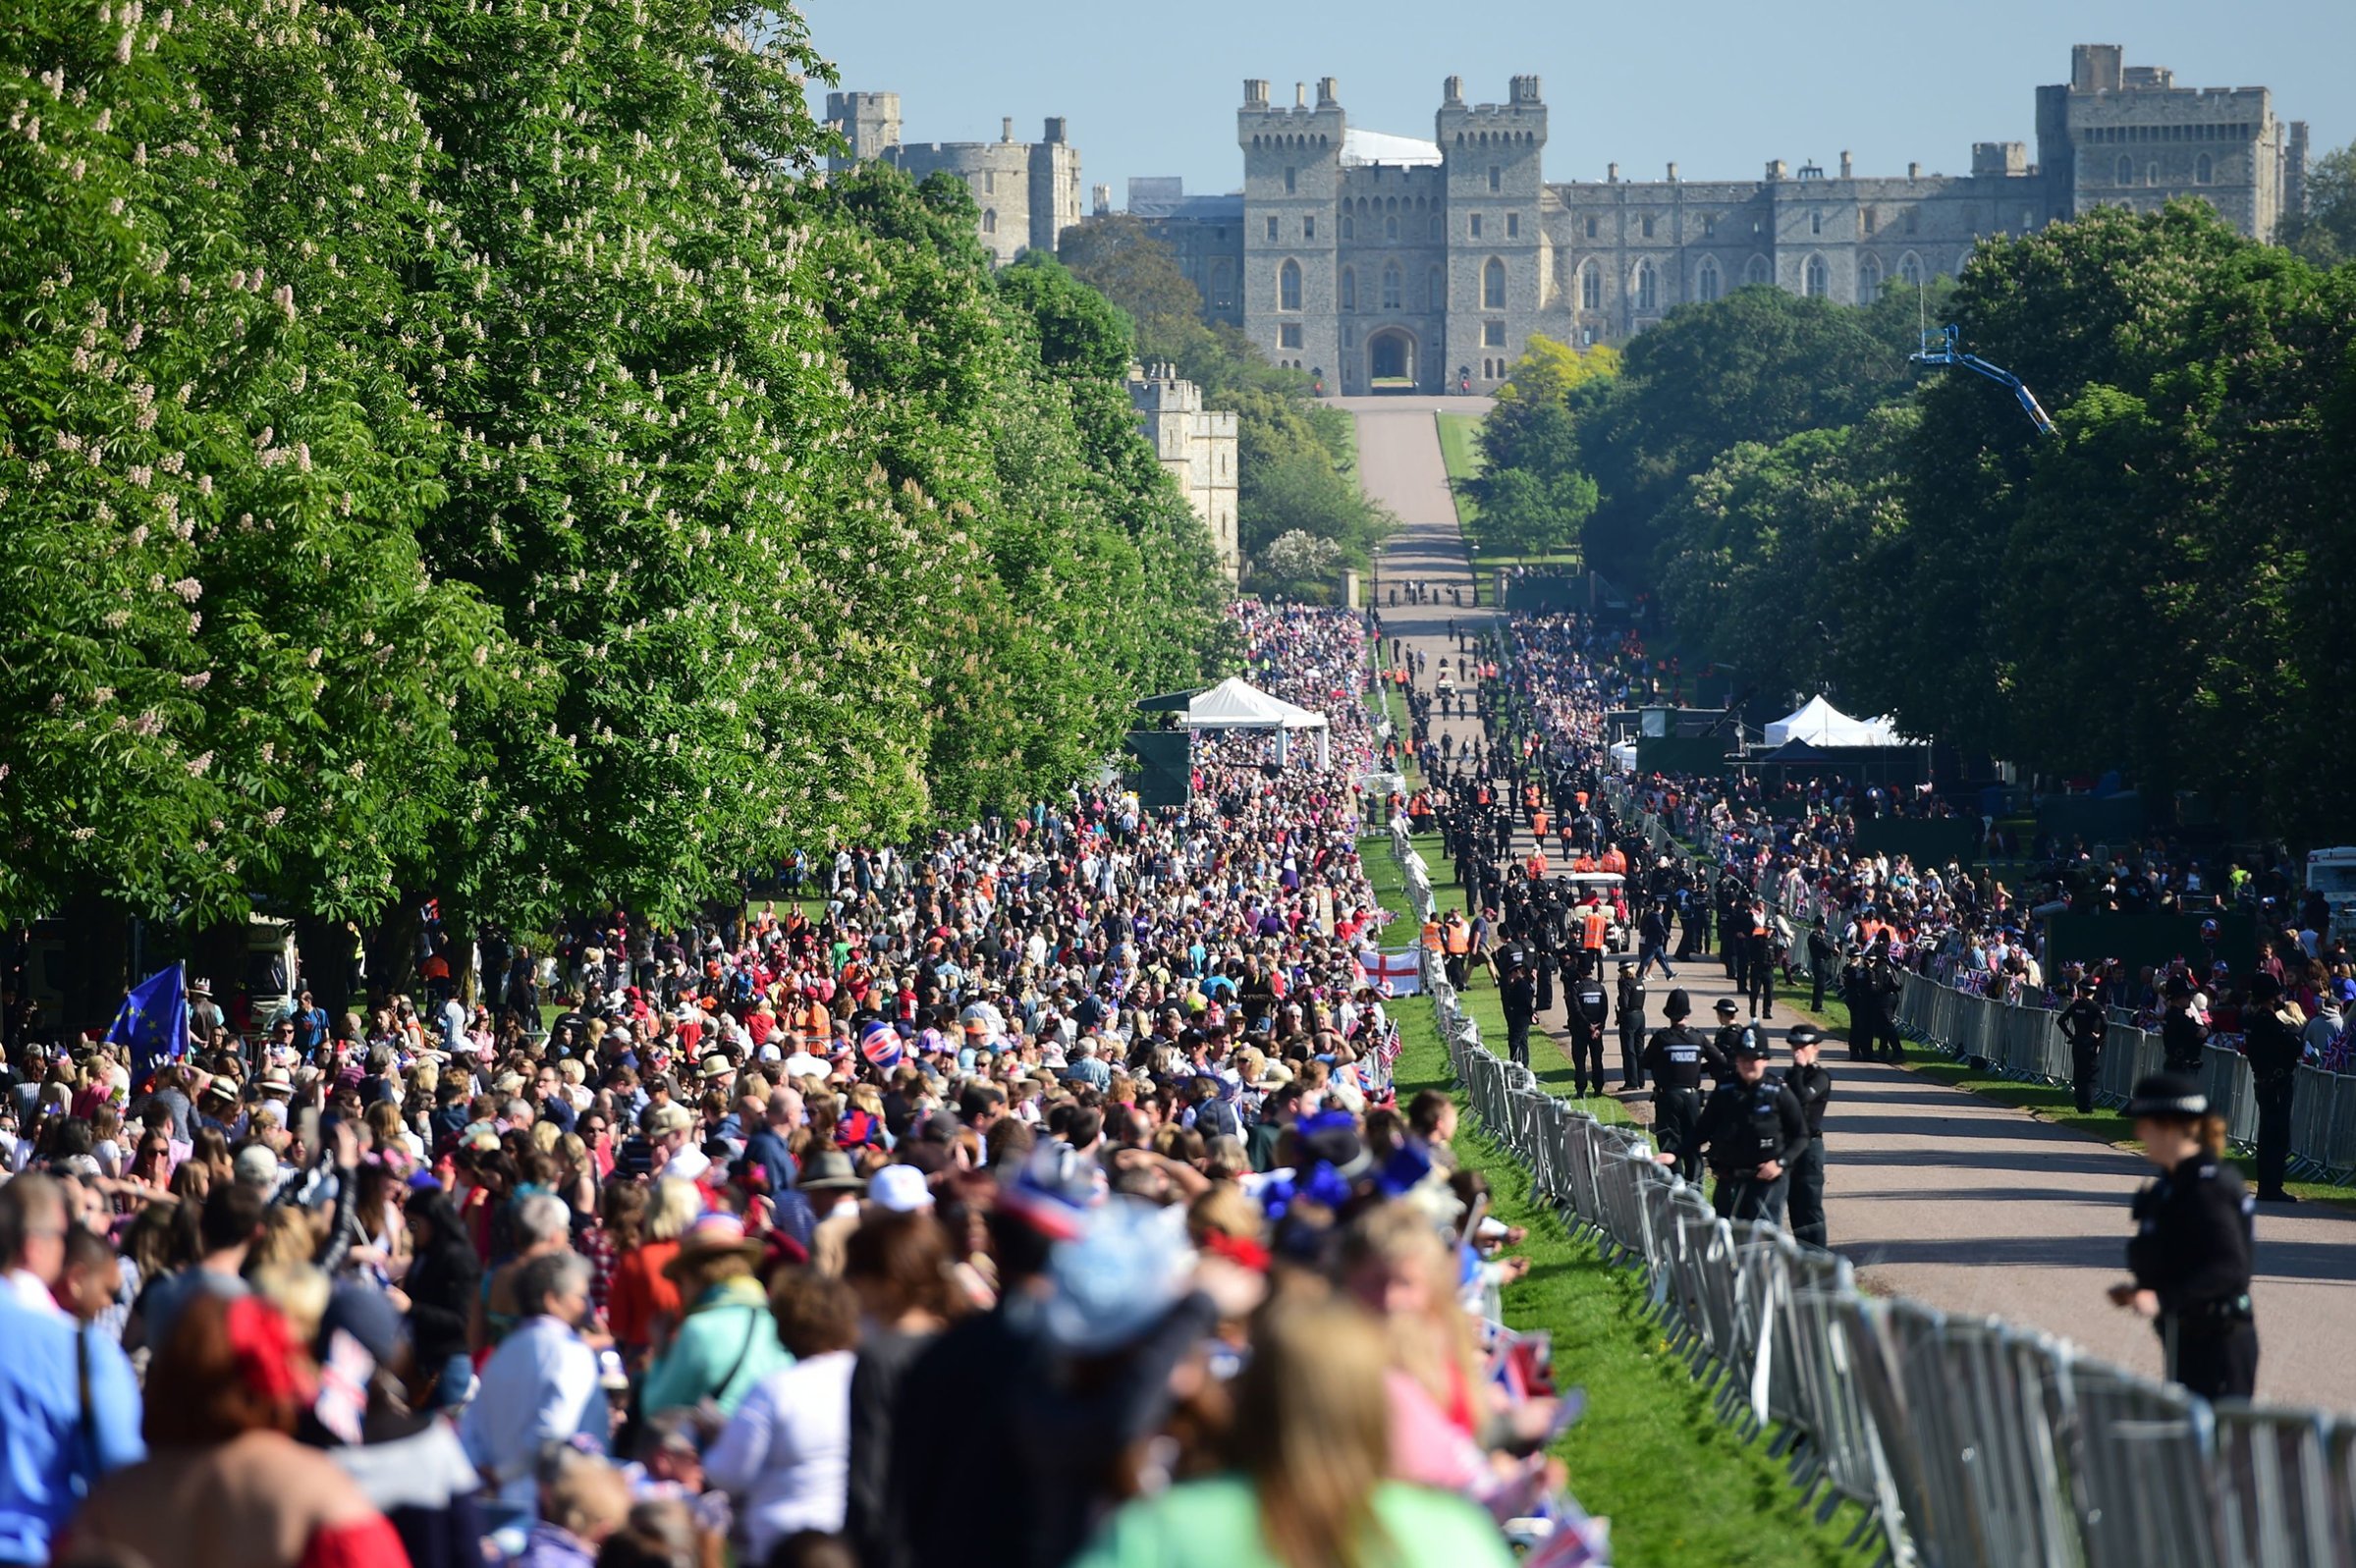 Royal wedding fans line the Long Walk in Windsor ahead of the wedding of Prince Harry and Meghan Markle, May 19, 2018.